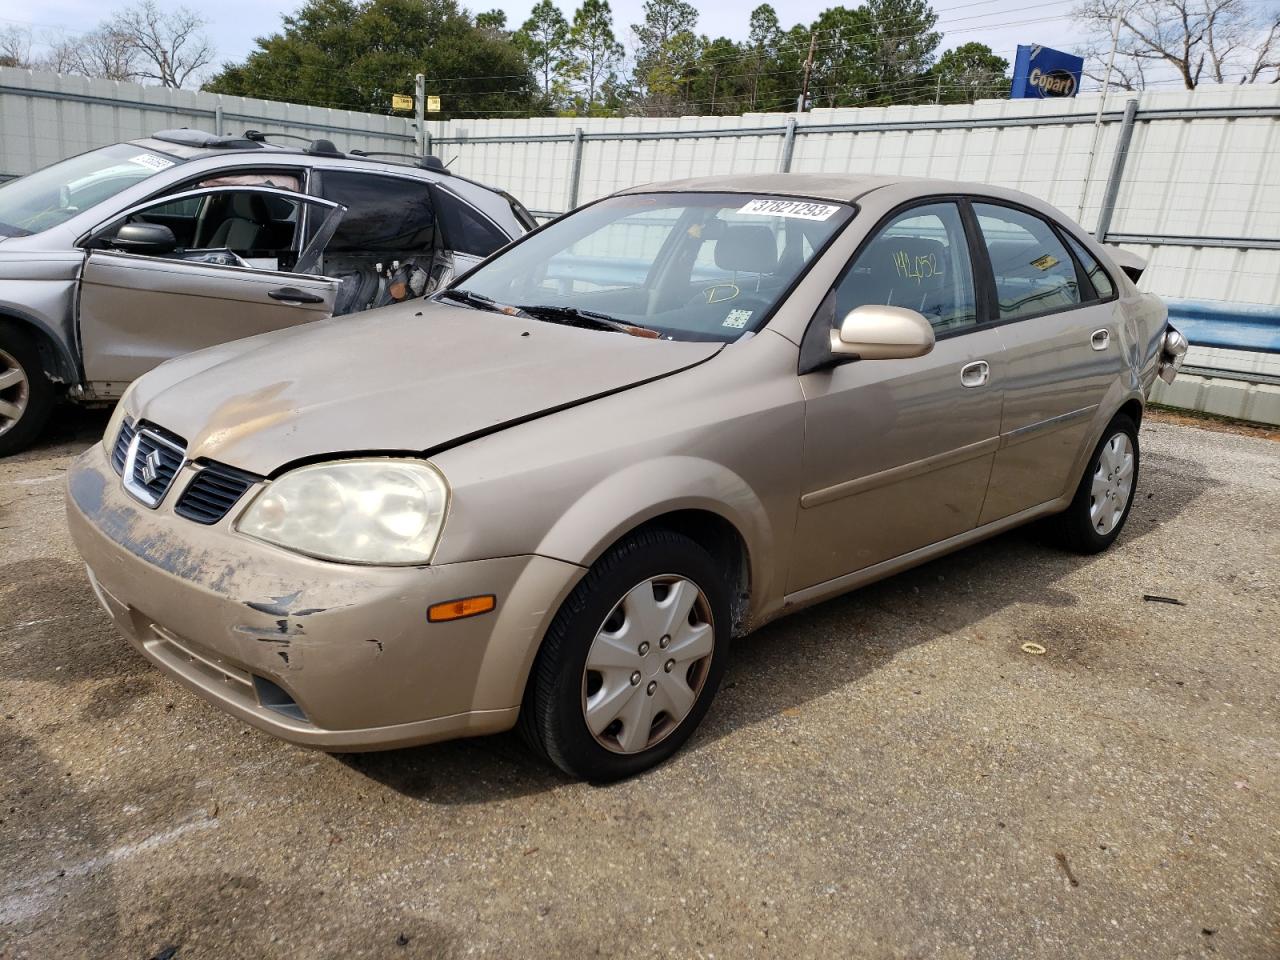 2004 Suzuki Forenza S for sale at Copart Eight Mile, AL. Lot #37821*** |  SalvageAutosAuction.com